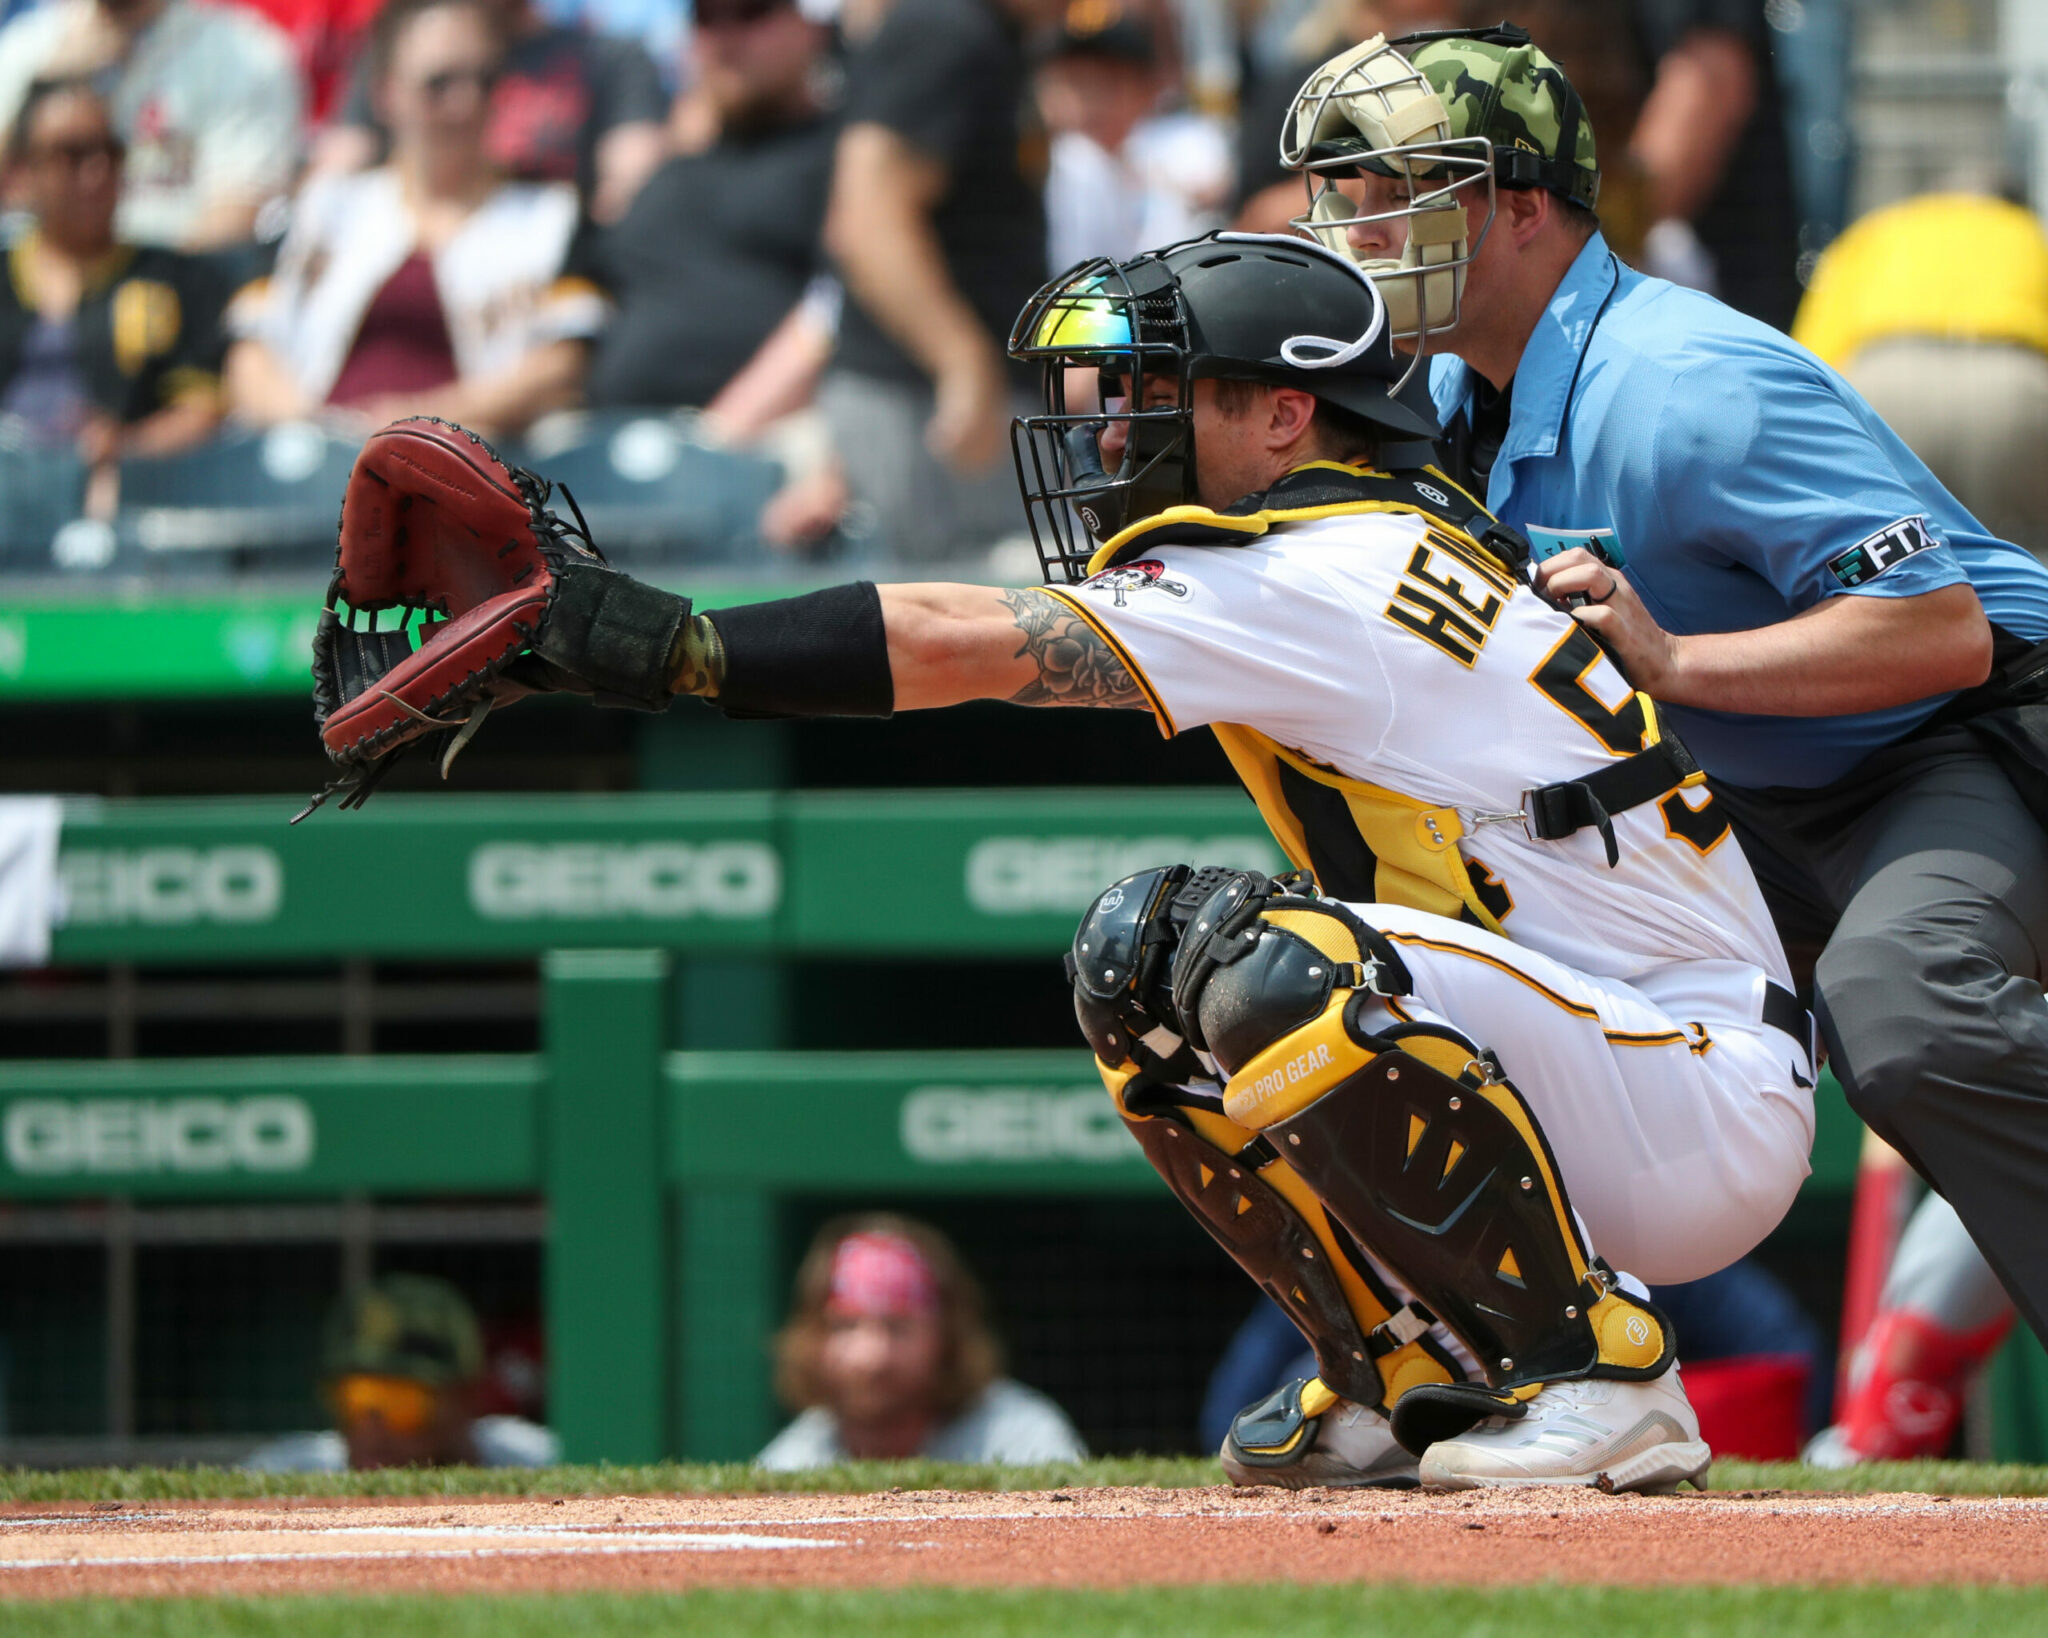 Pitch Framing Is Still A Point Of Emphasis For Pittsburgh Pirates Catchers